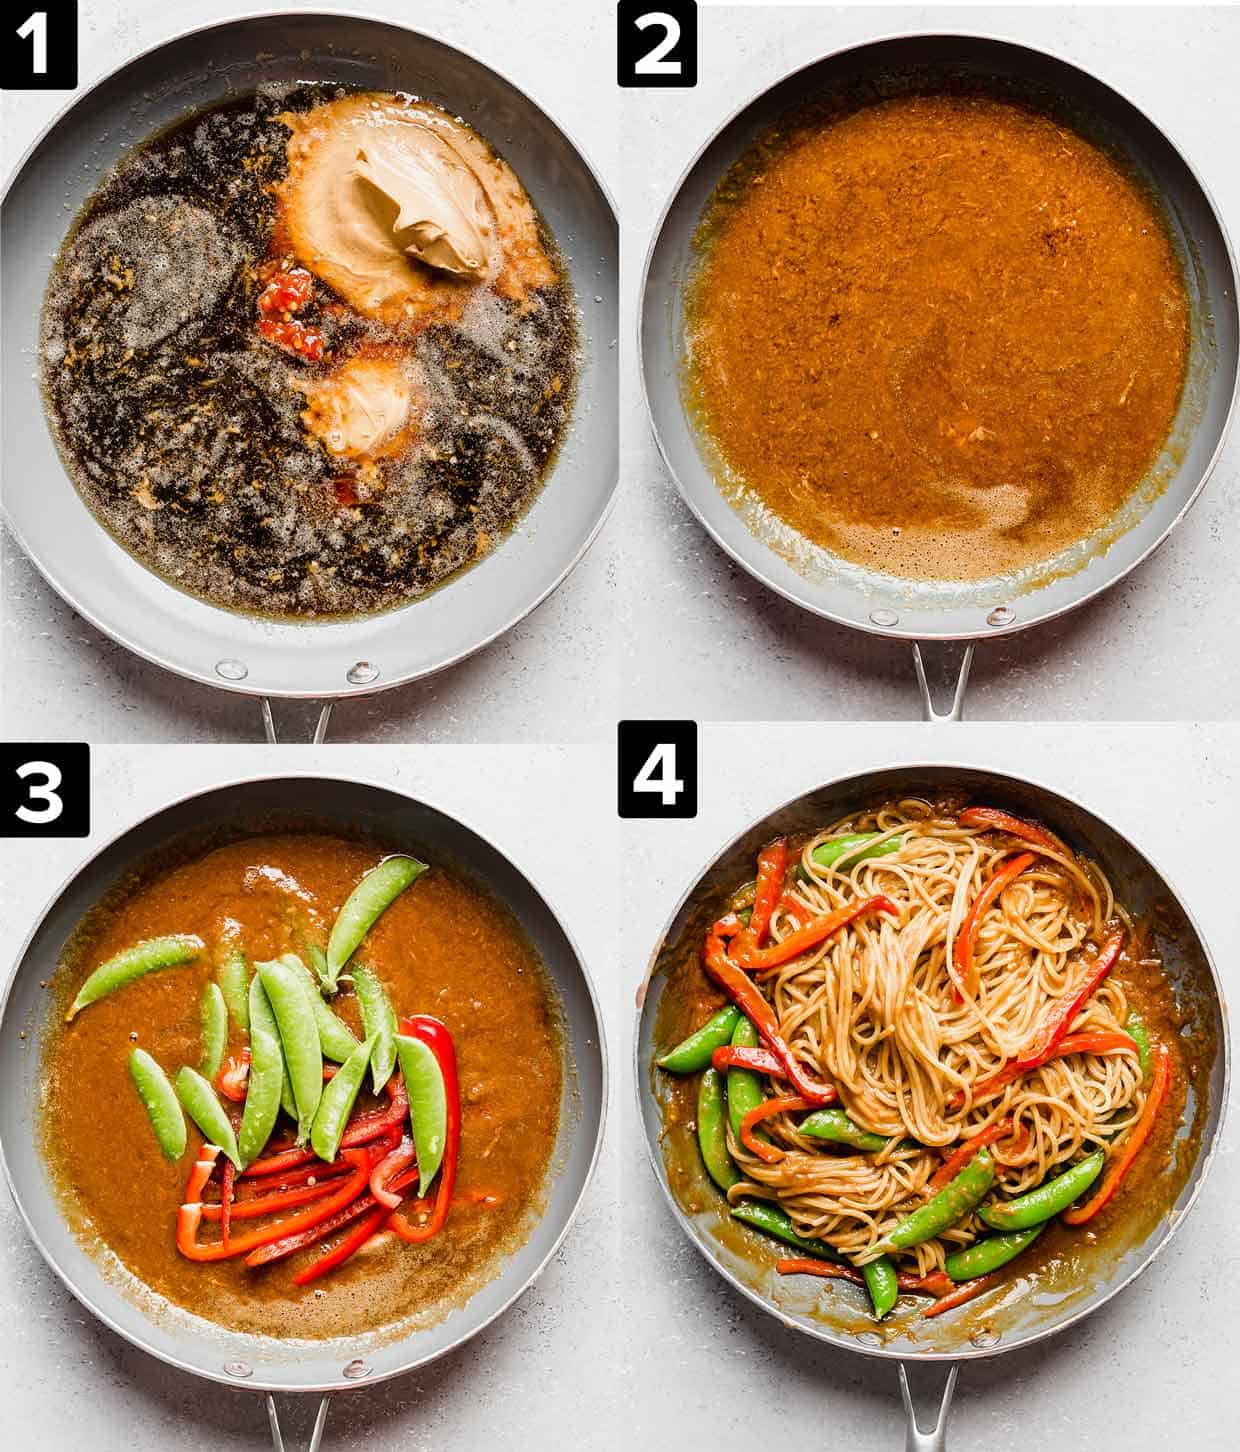 Four images showing the making of peanut butter noodles: a skillet filled with the sauce ingredients, then stirred, and vegetables added in.